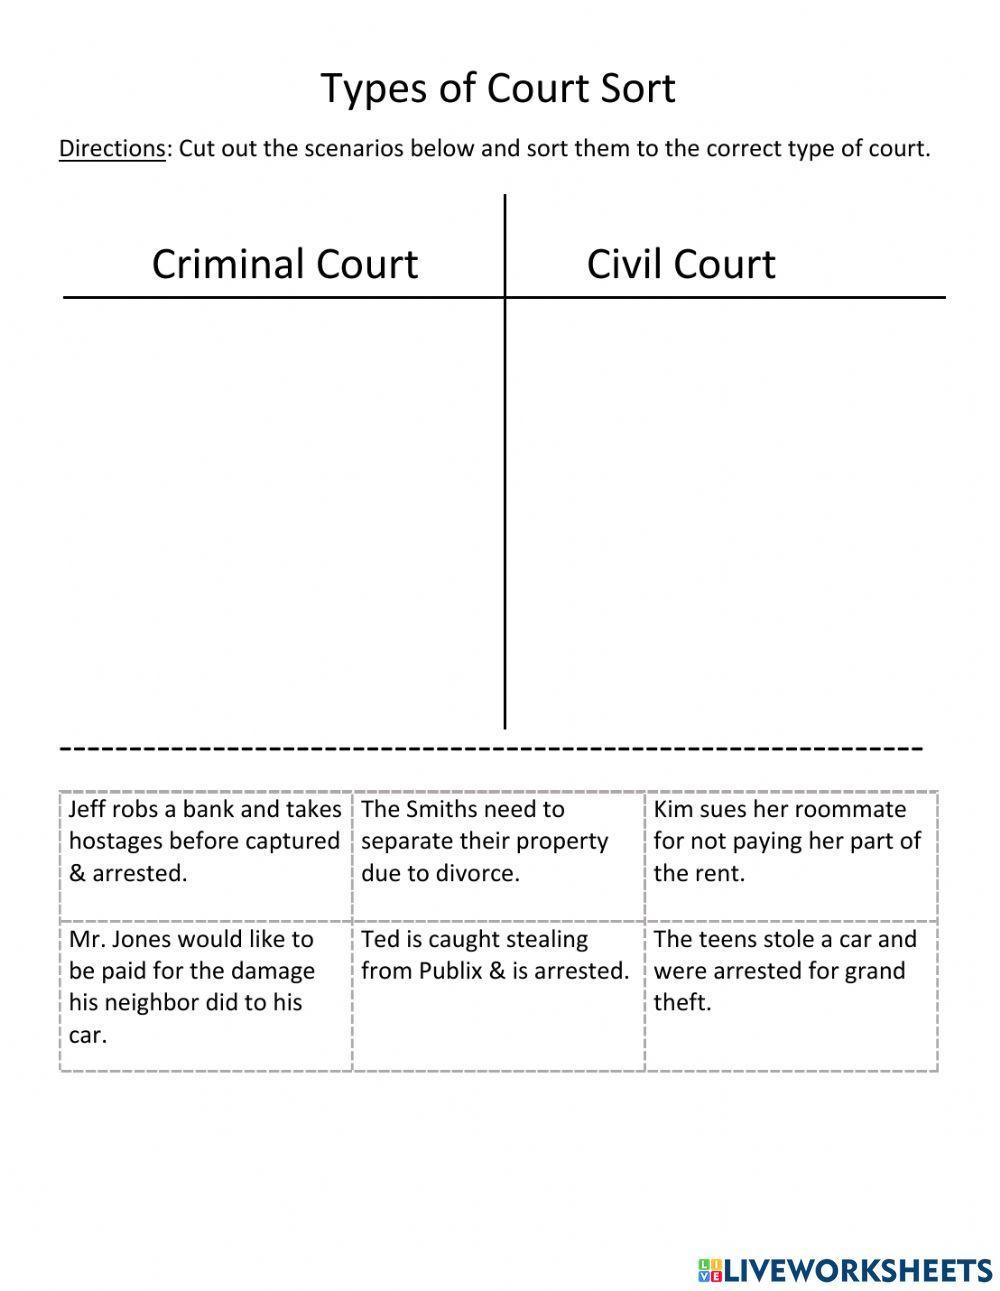 Unit 5B Types of Courts Sort Text Only